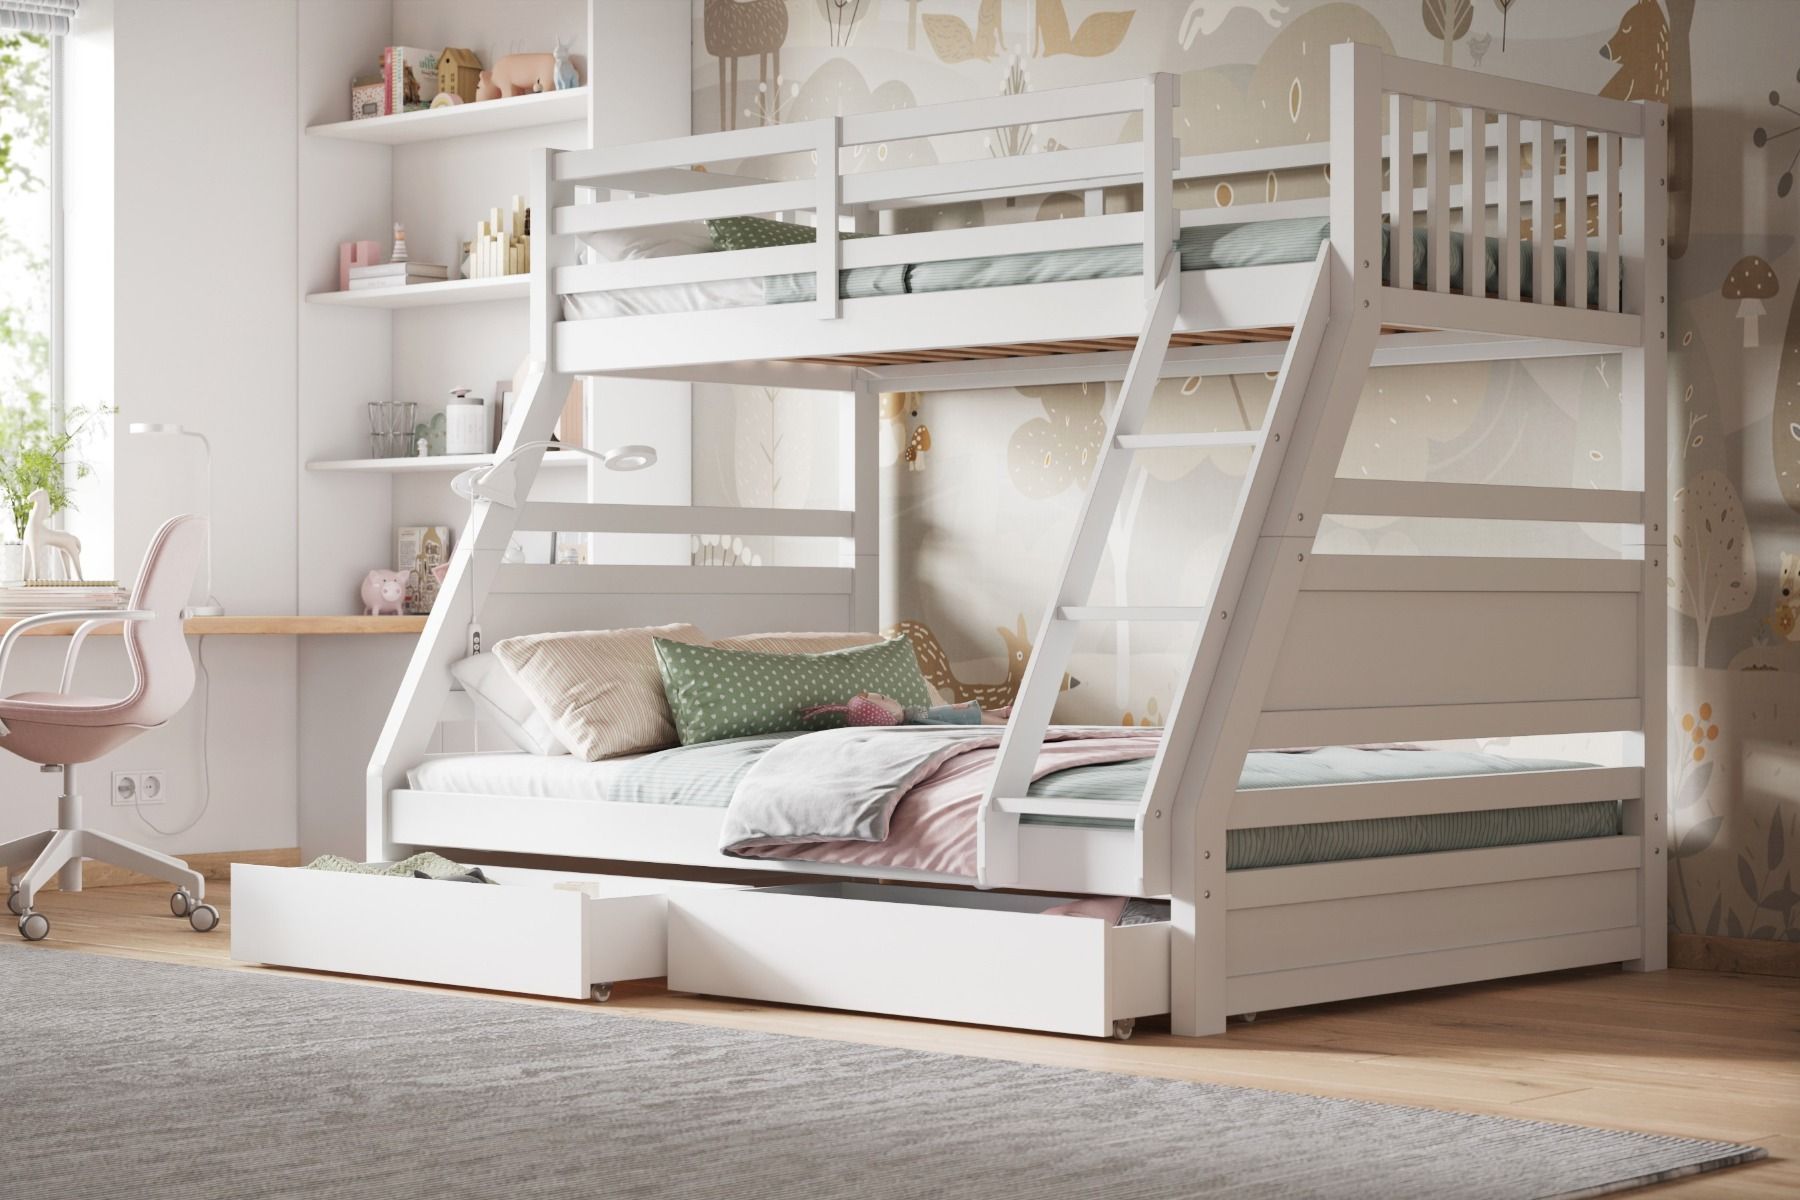 Flair Ollie Triple Bunk Bed with Storage Drawers - White